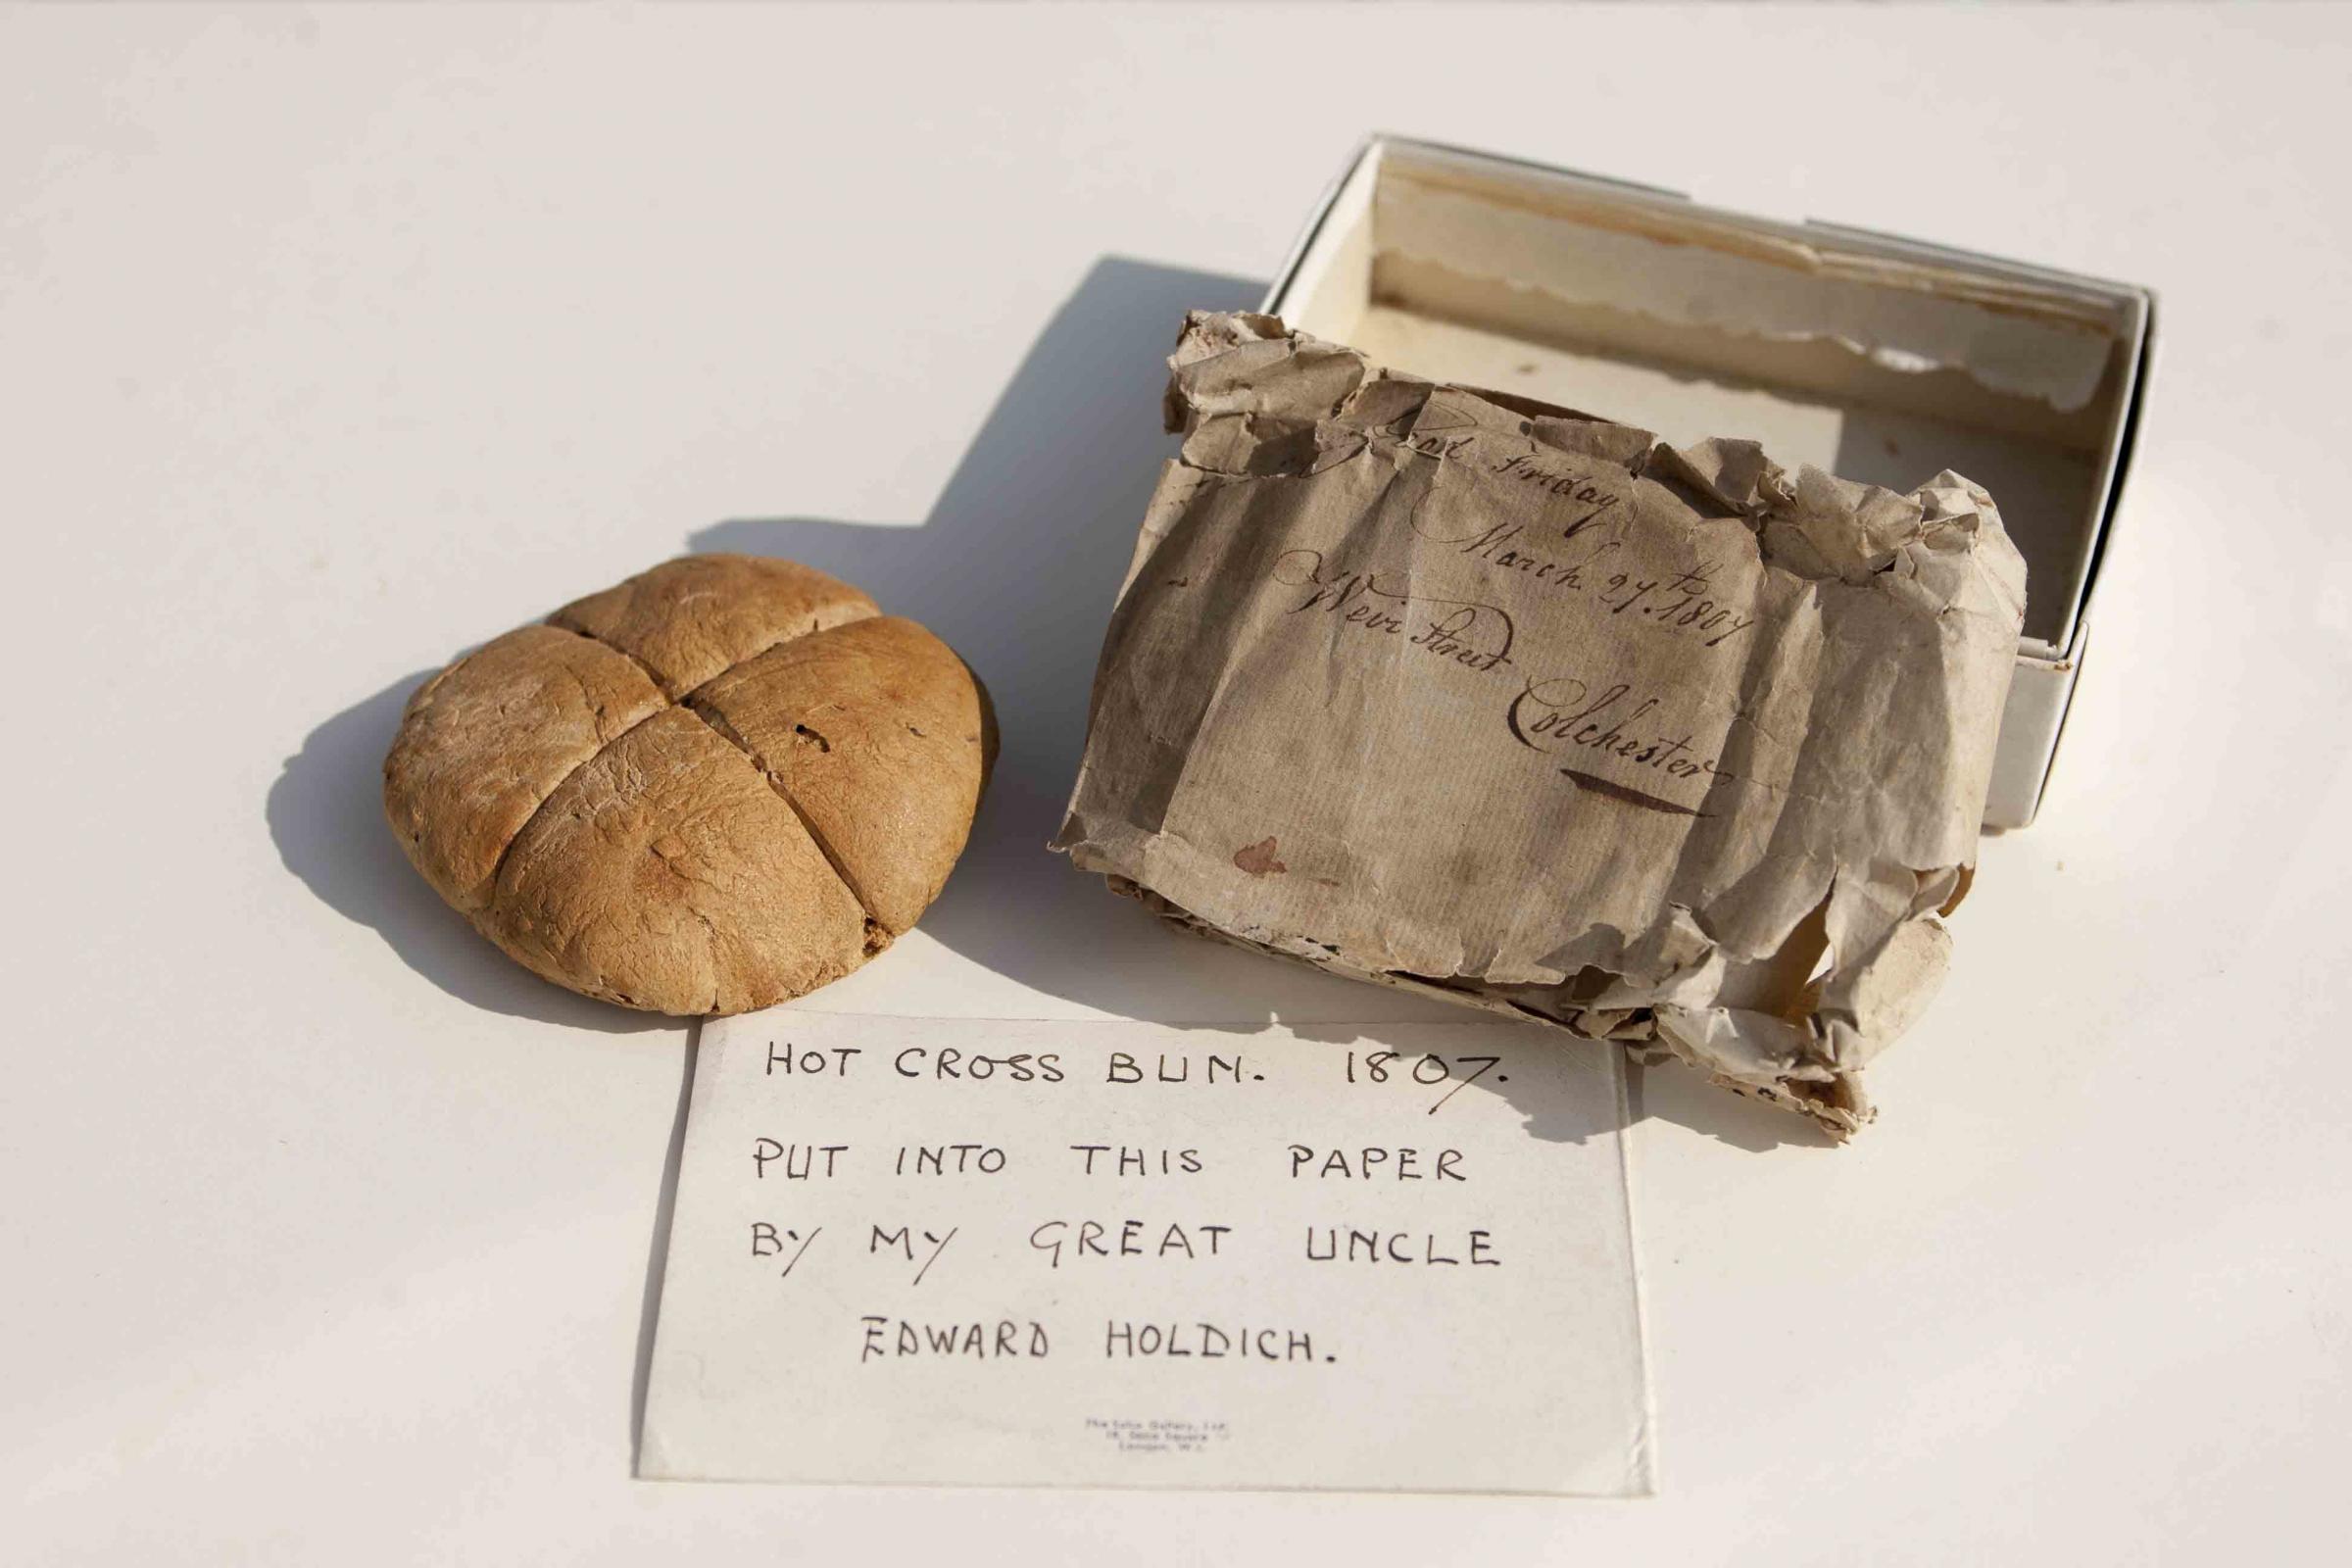 MYSTERY. The oldest hot cross bun in the world? the evidence